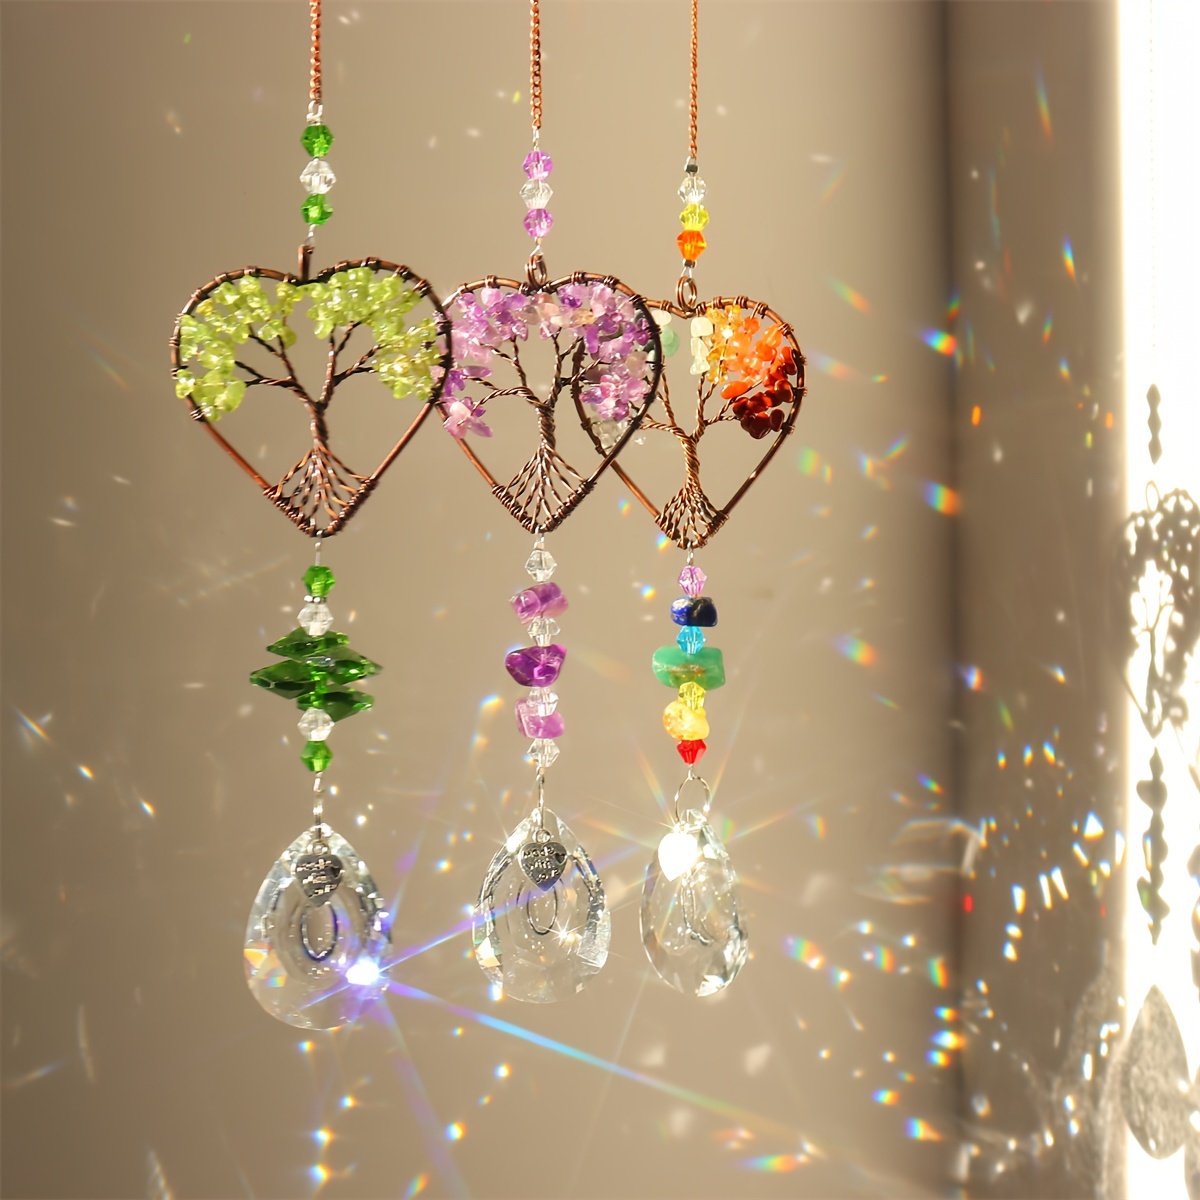 

Charming Tree Of Life Sun Catcher - Positive Energy Glass Window Decor For Home & Garden, Available In 1pc Or 3pcs Set